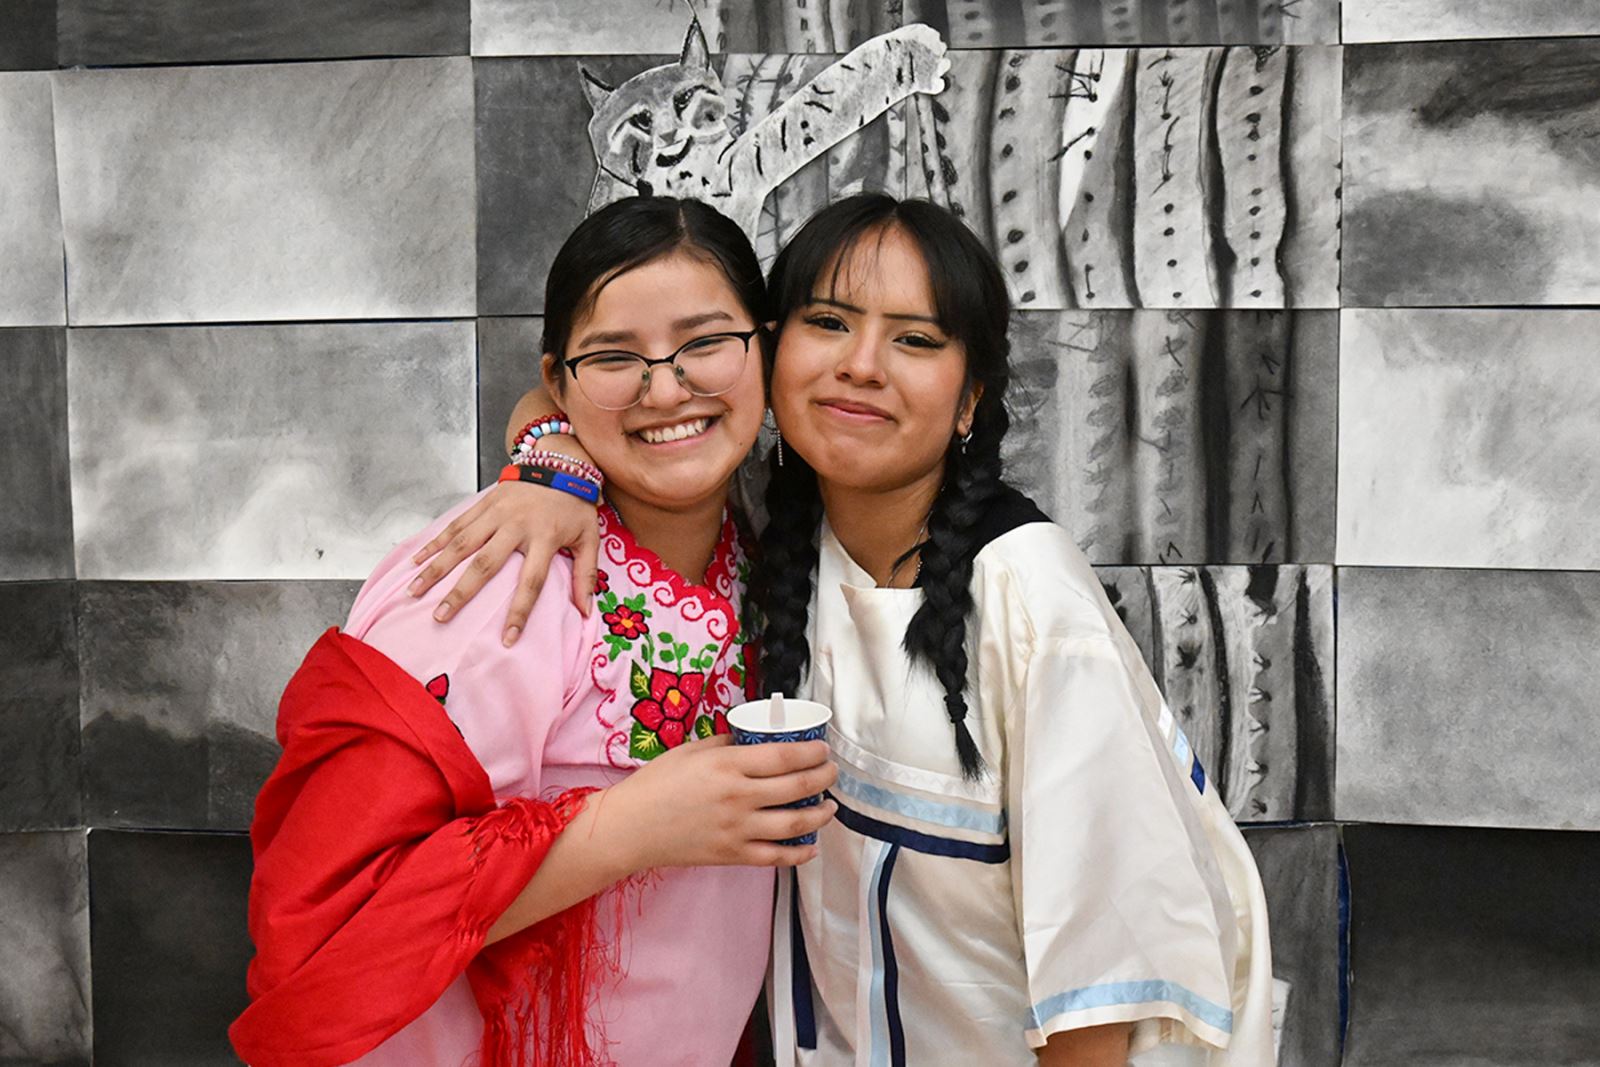 Two girls smile and pose in traditional Indigenous clothing.